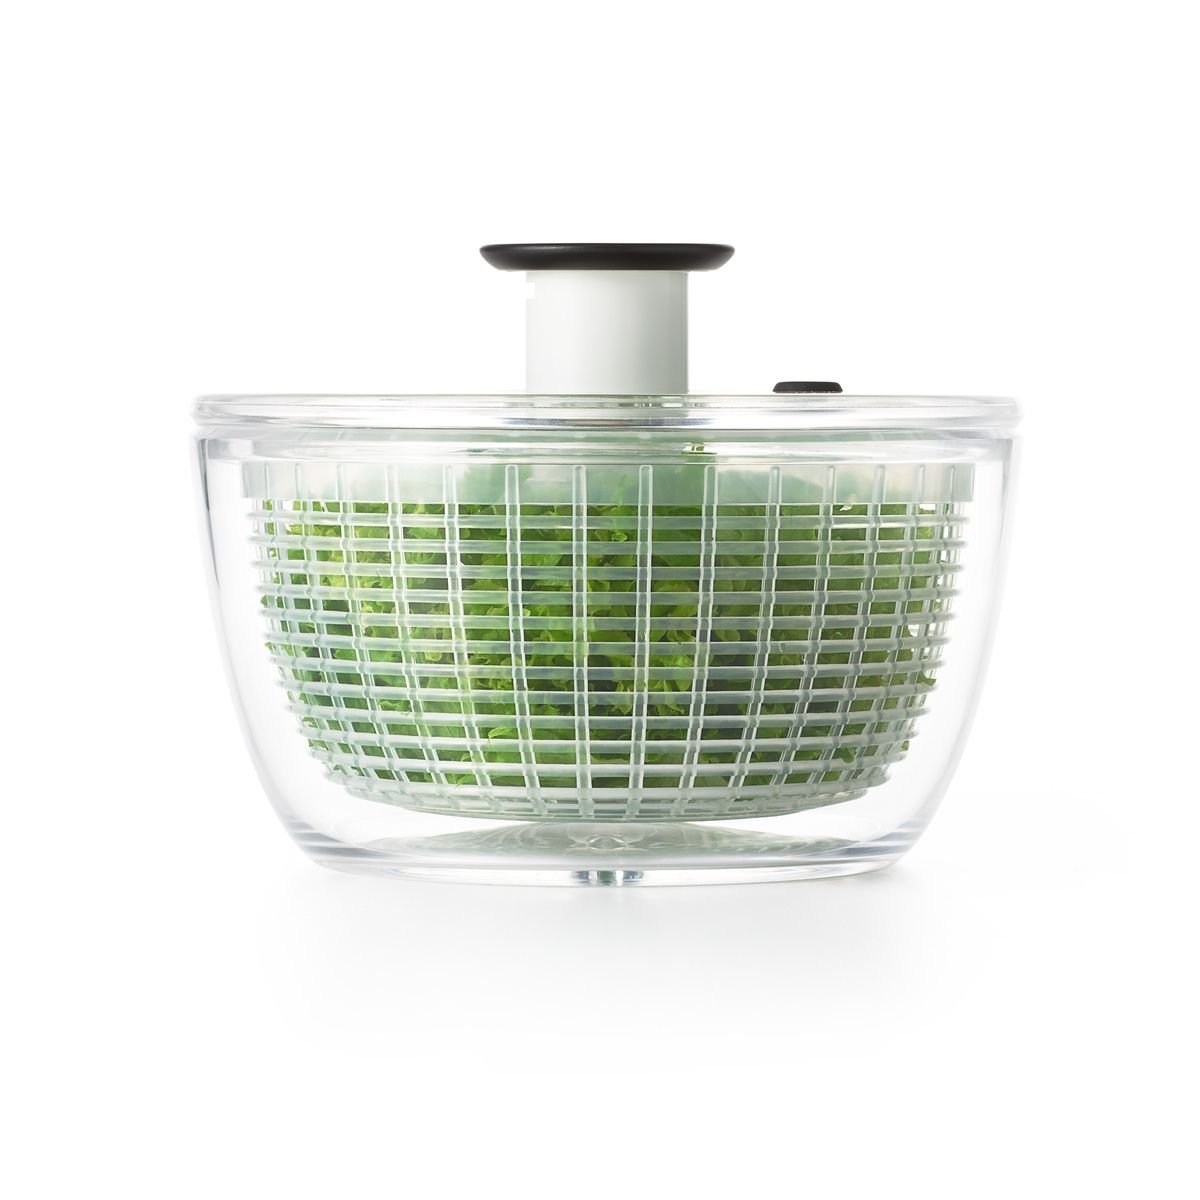 OXO Good Grips Salad Spinner,Green, Large - household items - by